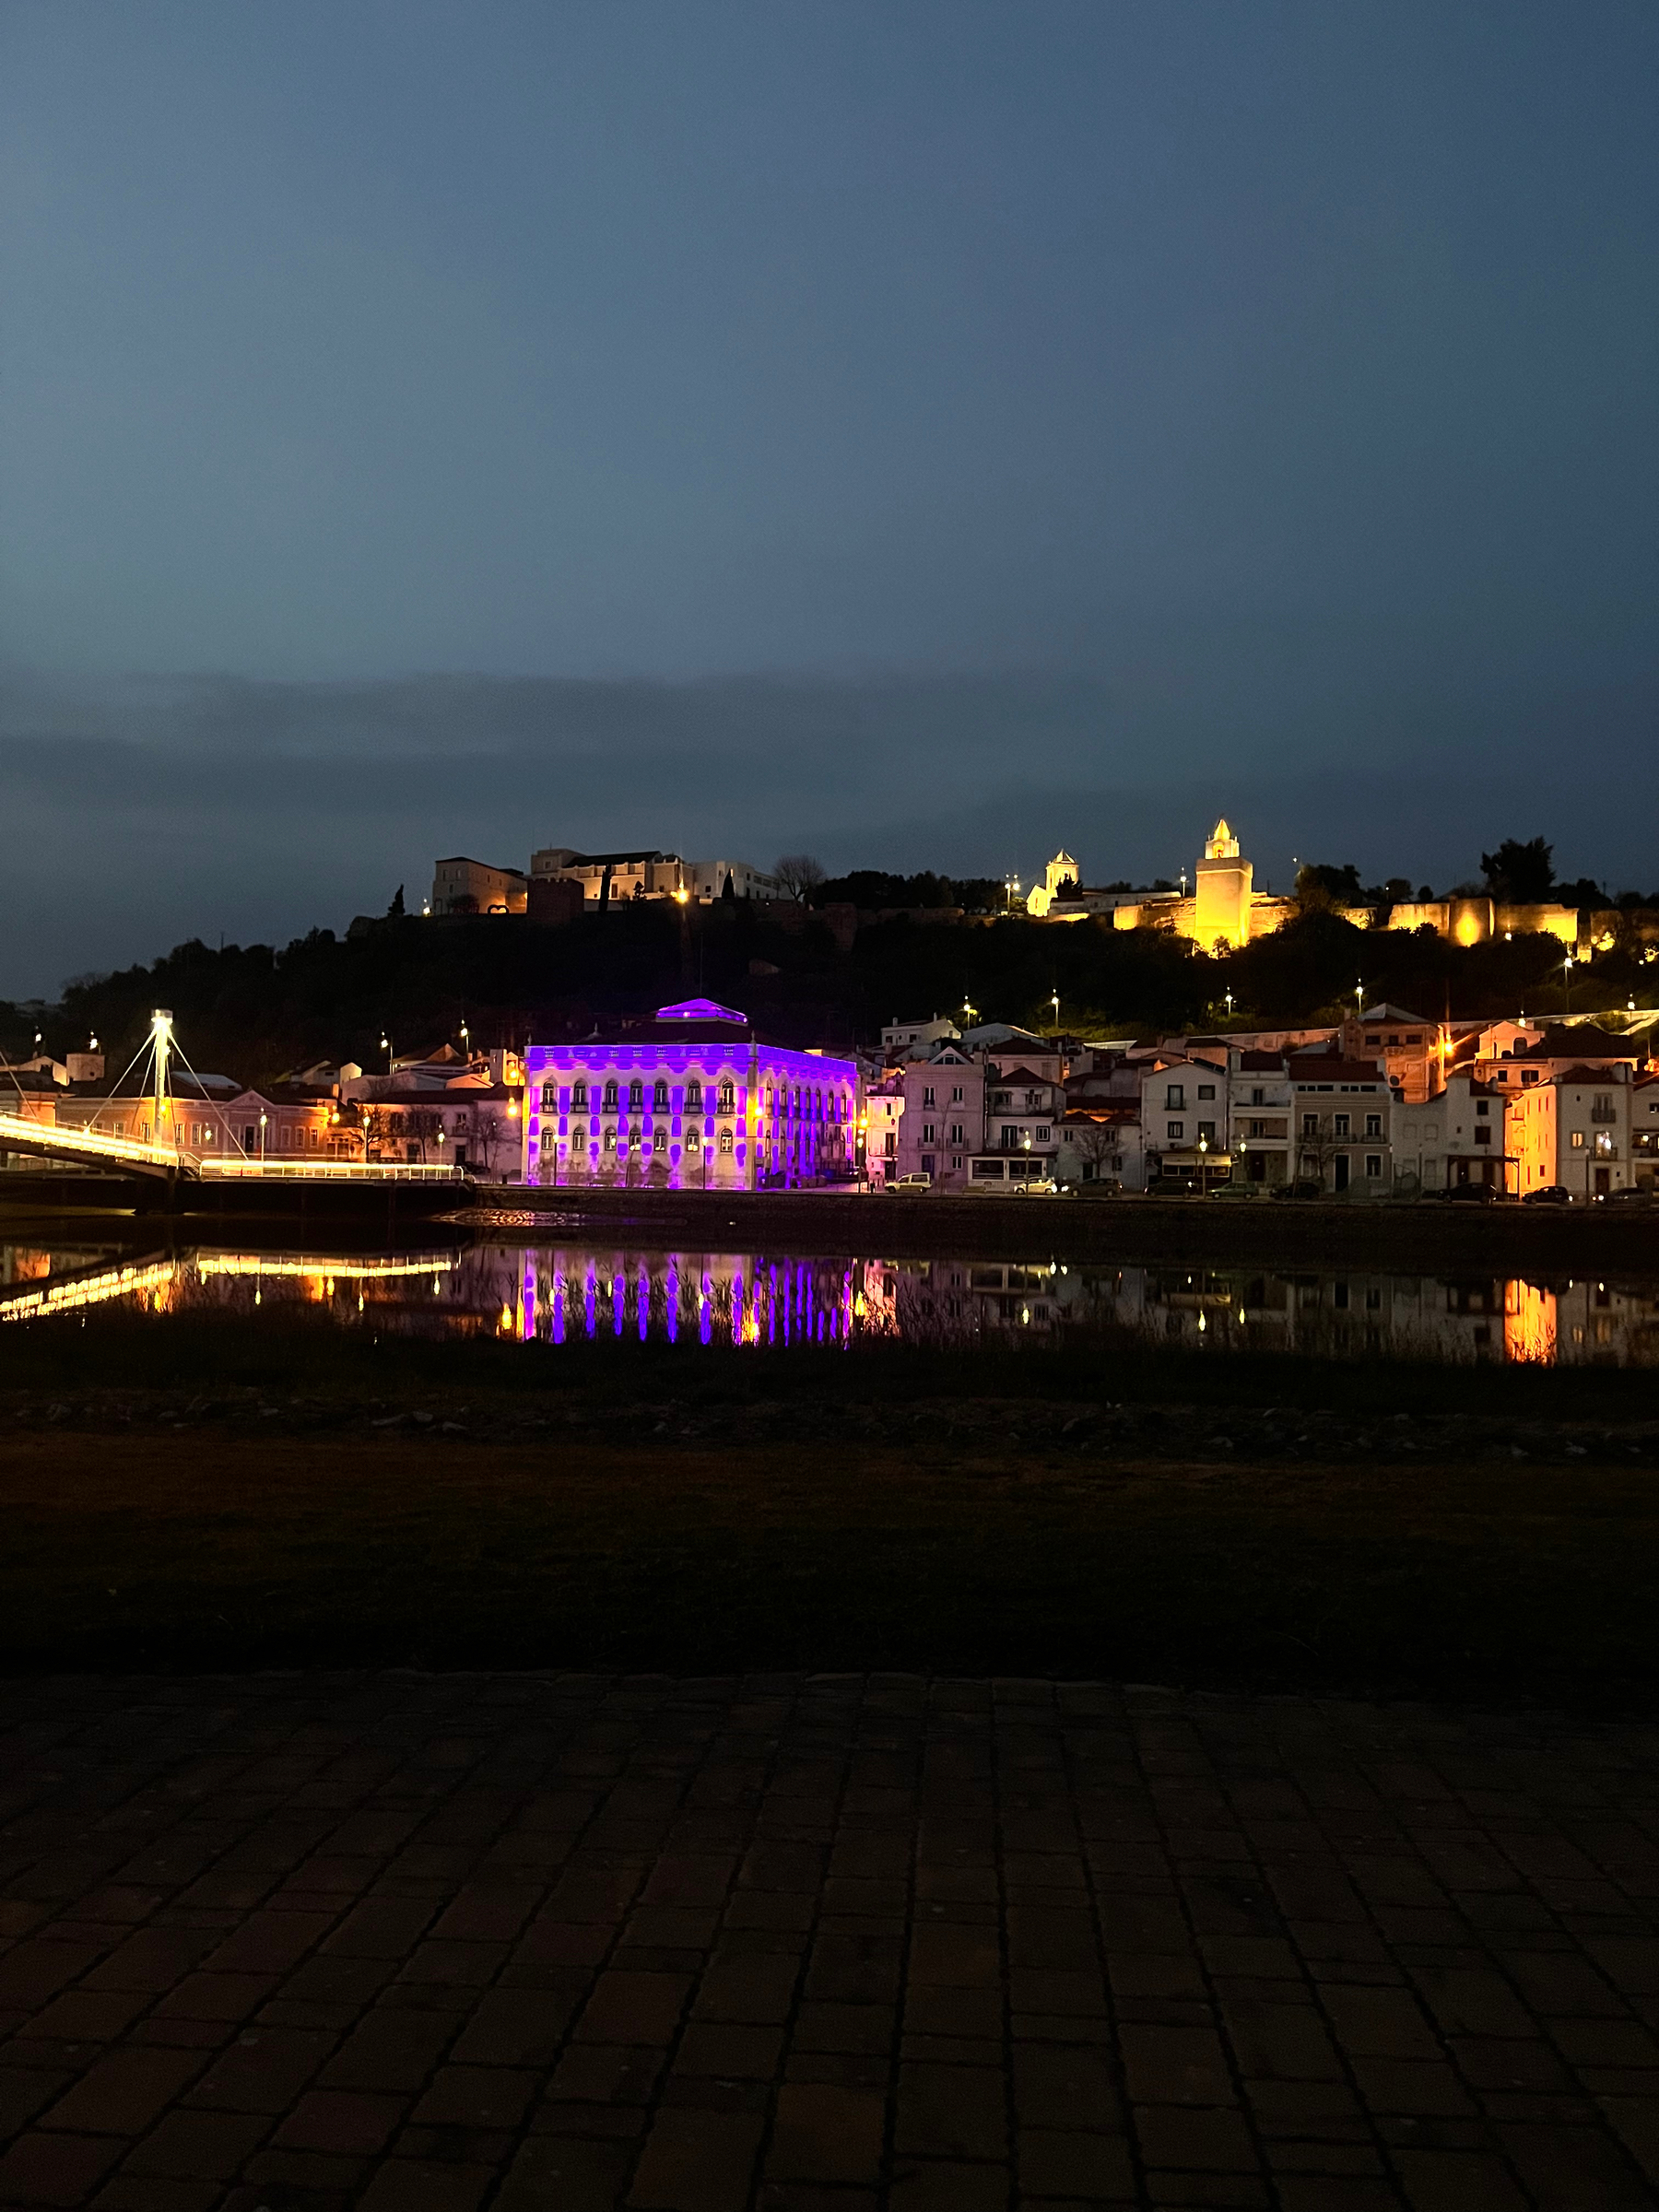 Council building and Castle lit up at night in Alcácer do Sal